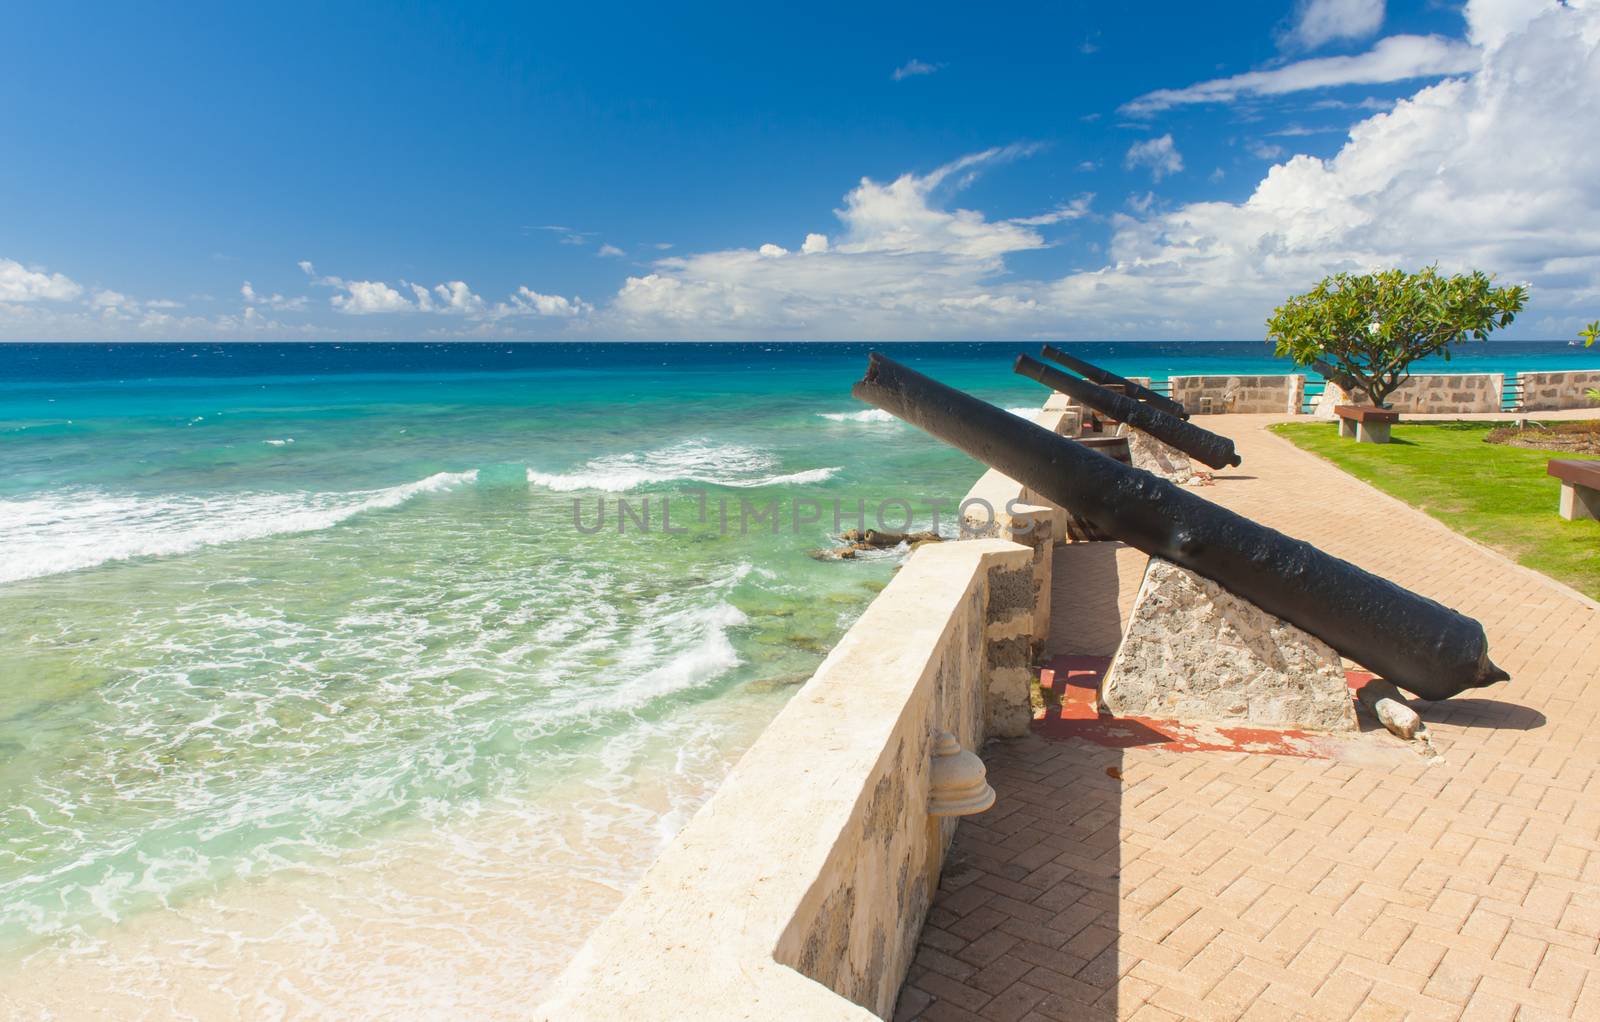 Needham's Point is a medieval fortification with cannons on the tropical Caribbean island of Barbados